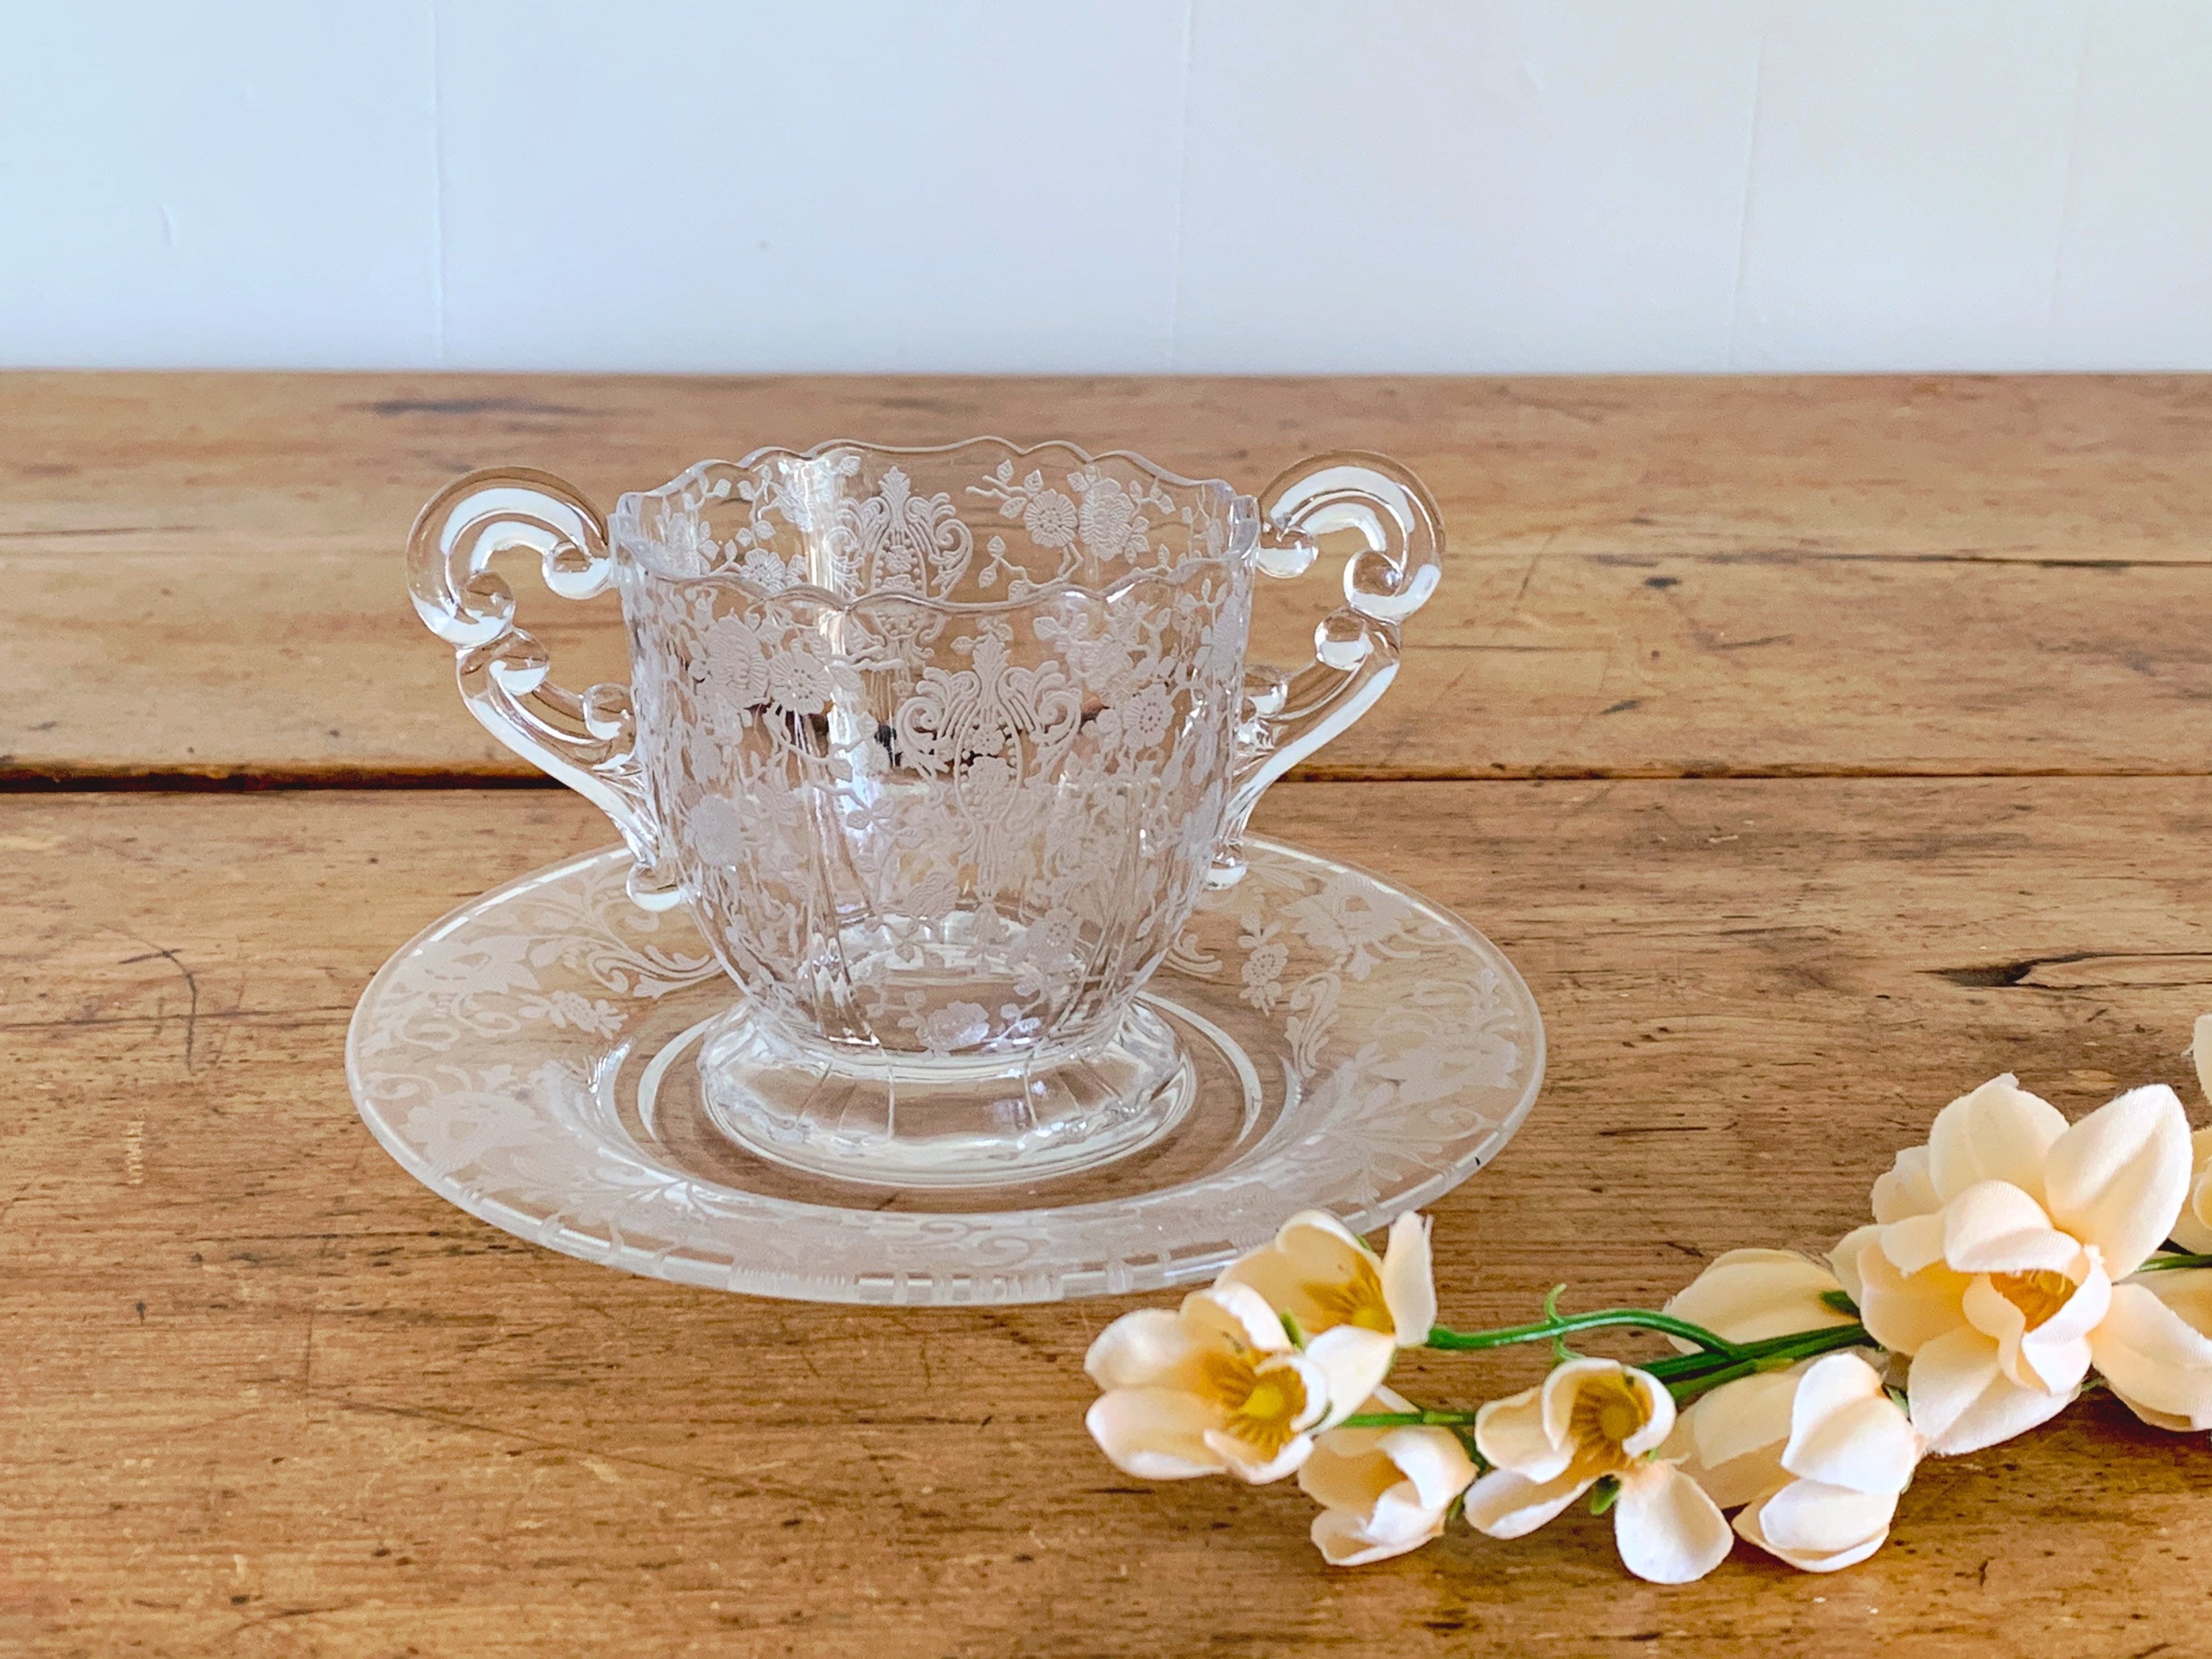 Vintage 1940s Cambridge Glass Sugar Bowl Rose Point Etch Pattern and Saucer | Depression Glass Mix Match Tableware Afternoon Tea